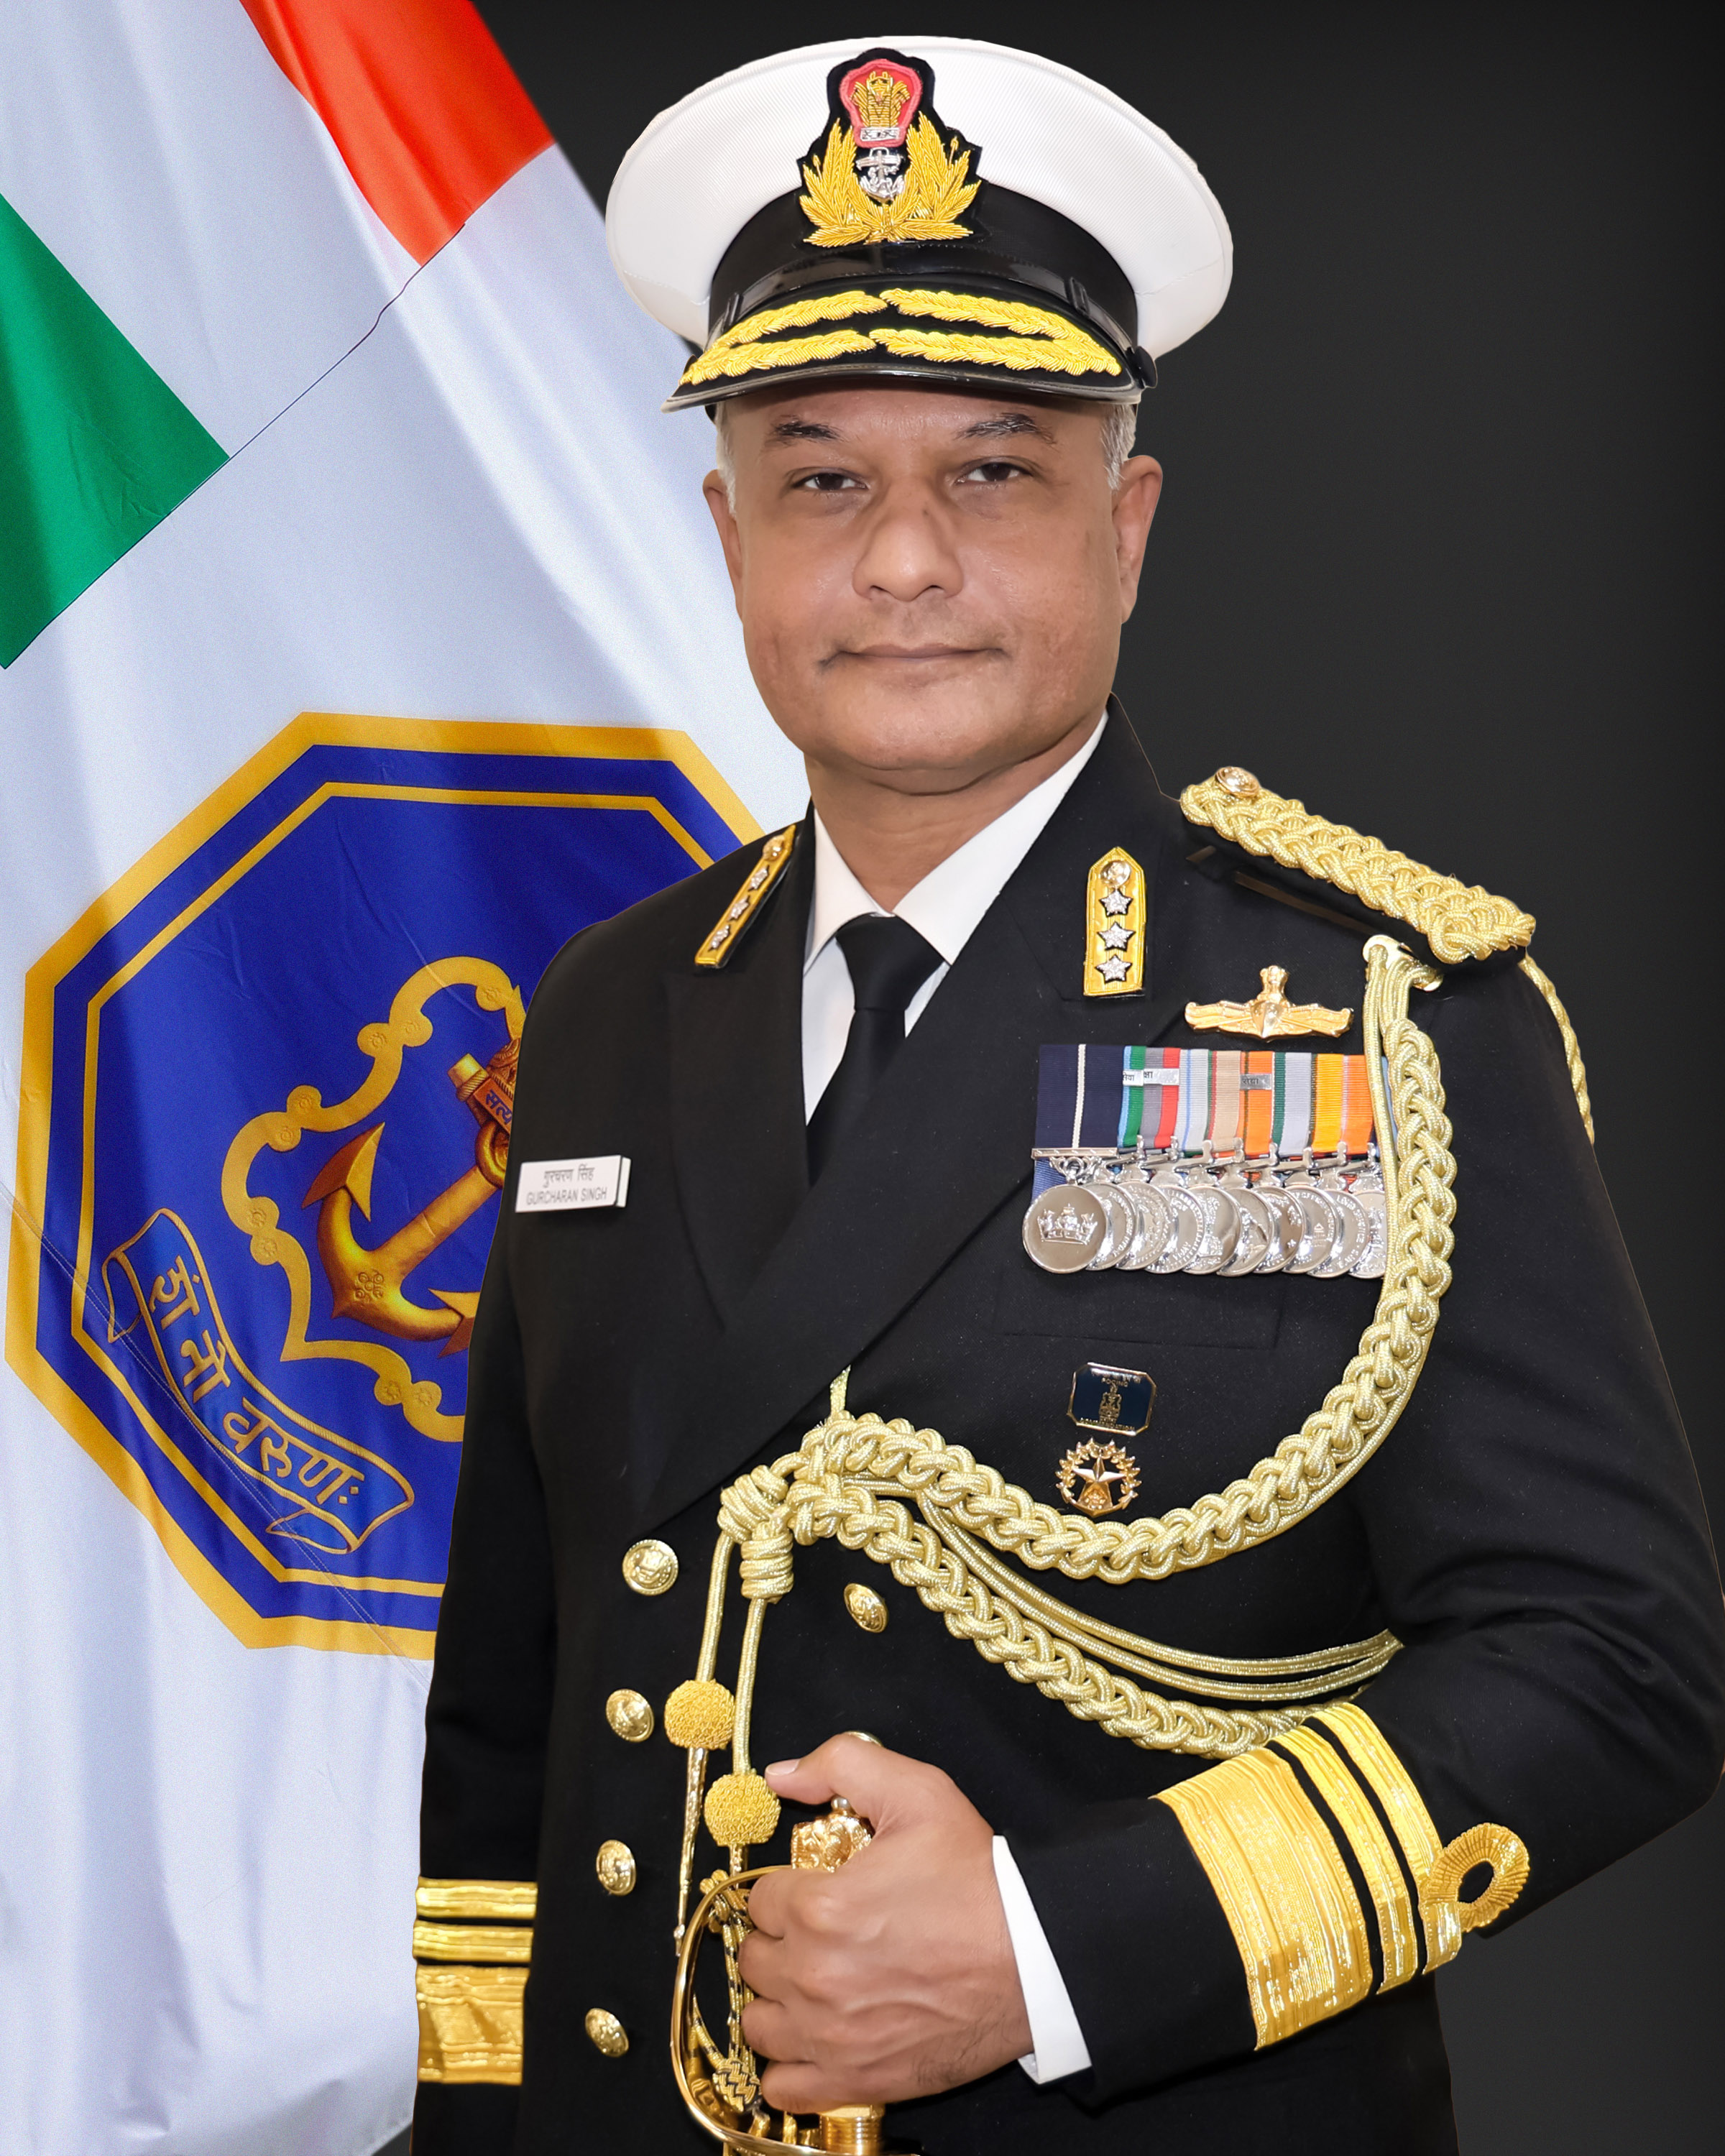 Controller Personnel Services, Vice Admiral Gurcharan Singh, NM